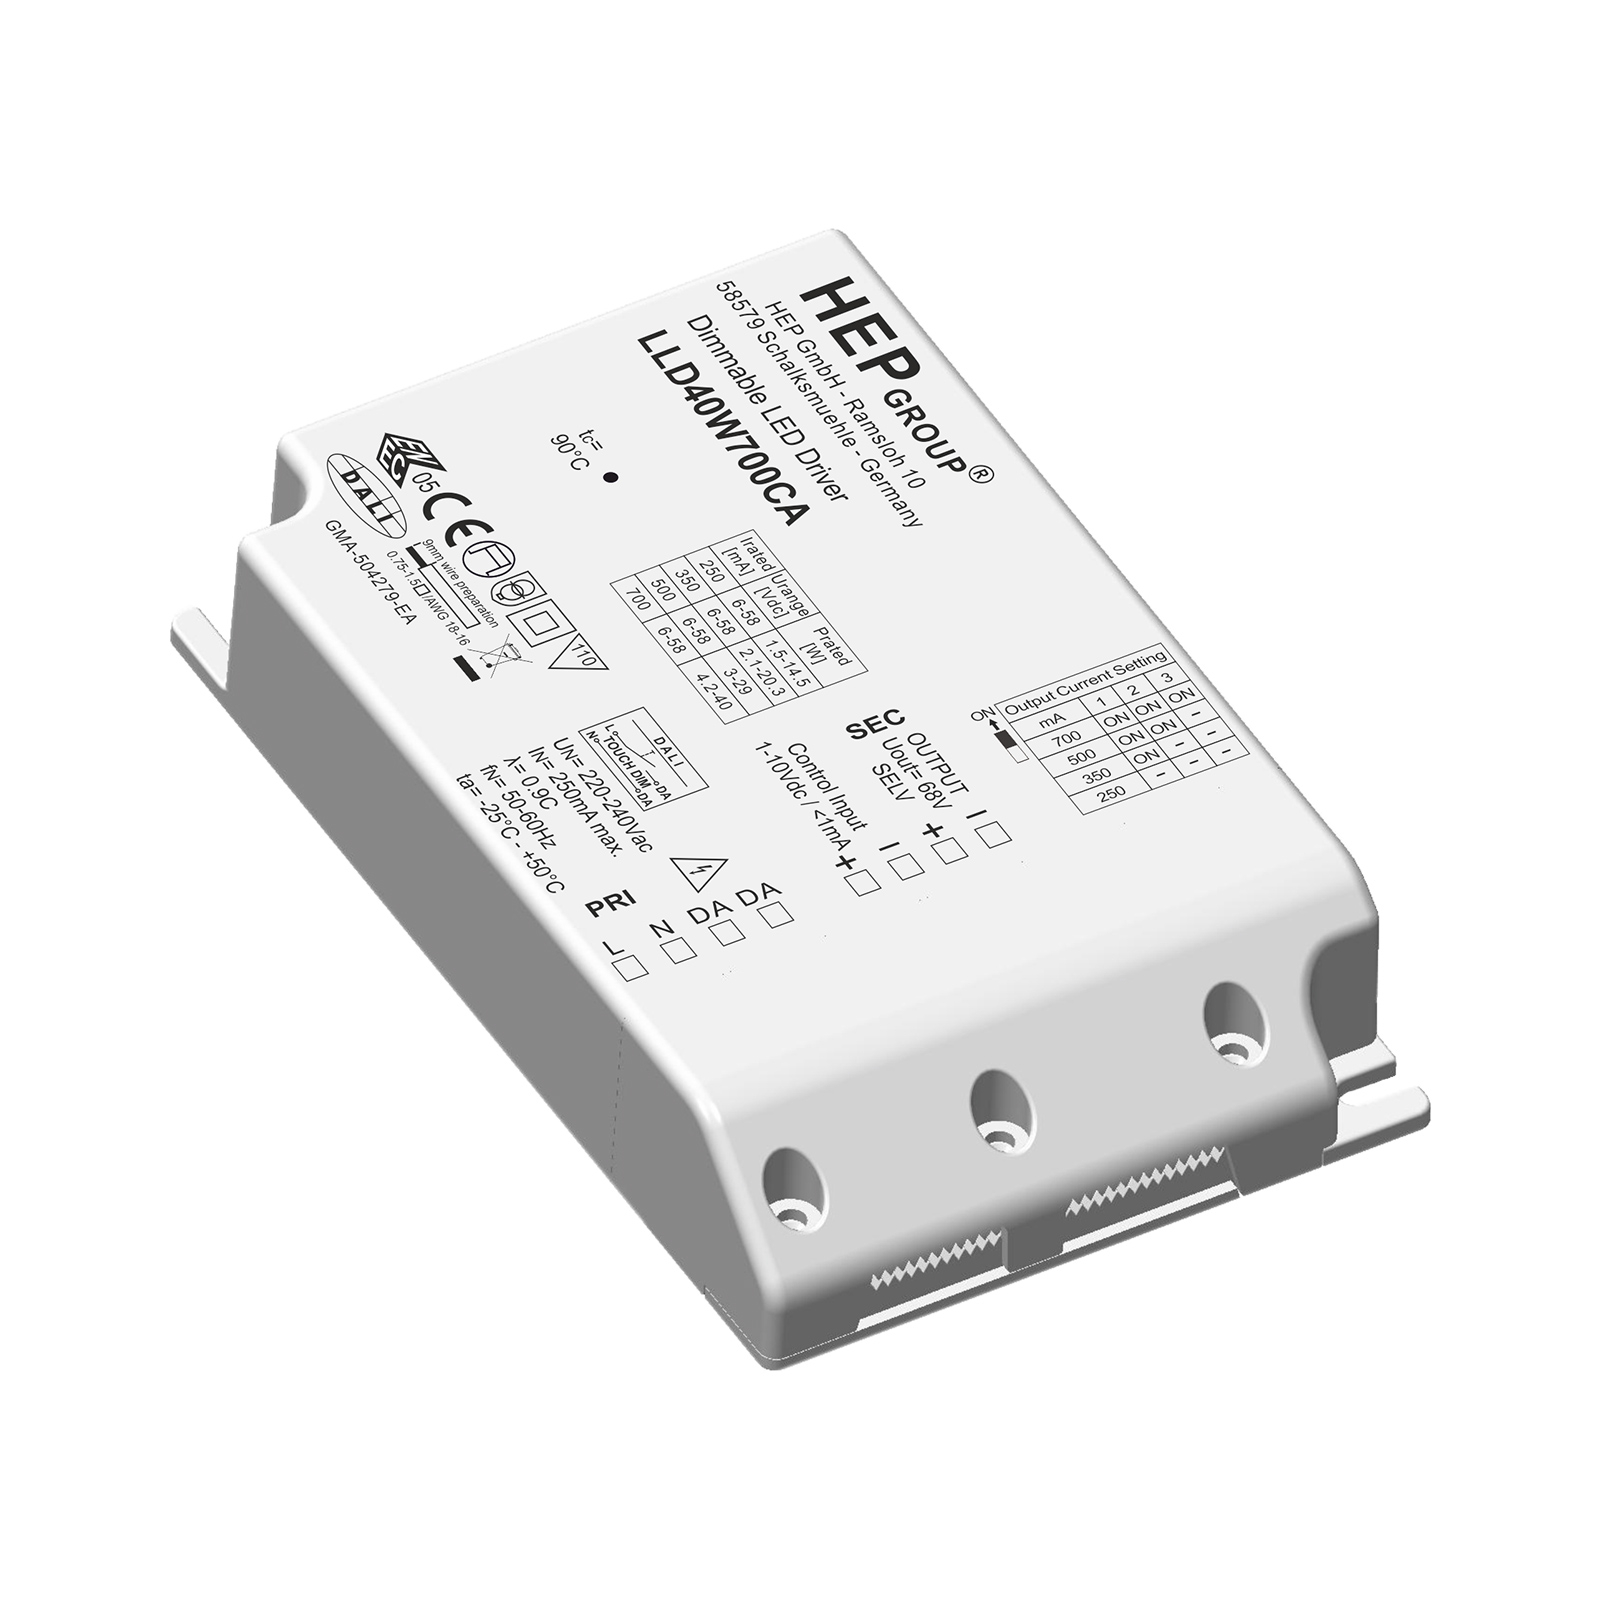 LED driver LLD, 40 W, 700 mA, dimmable, CC